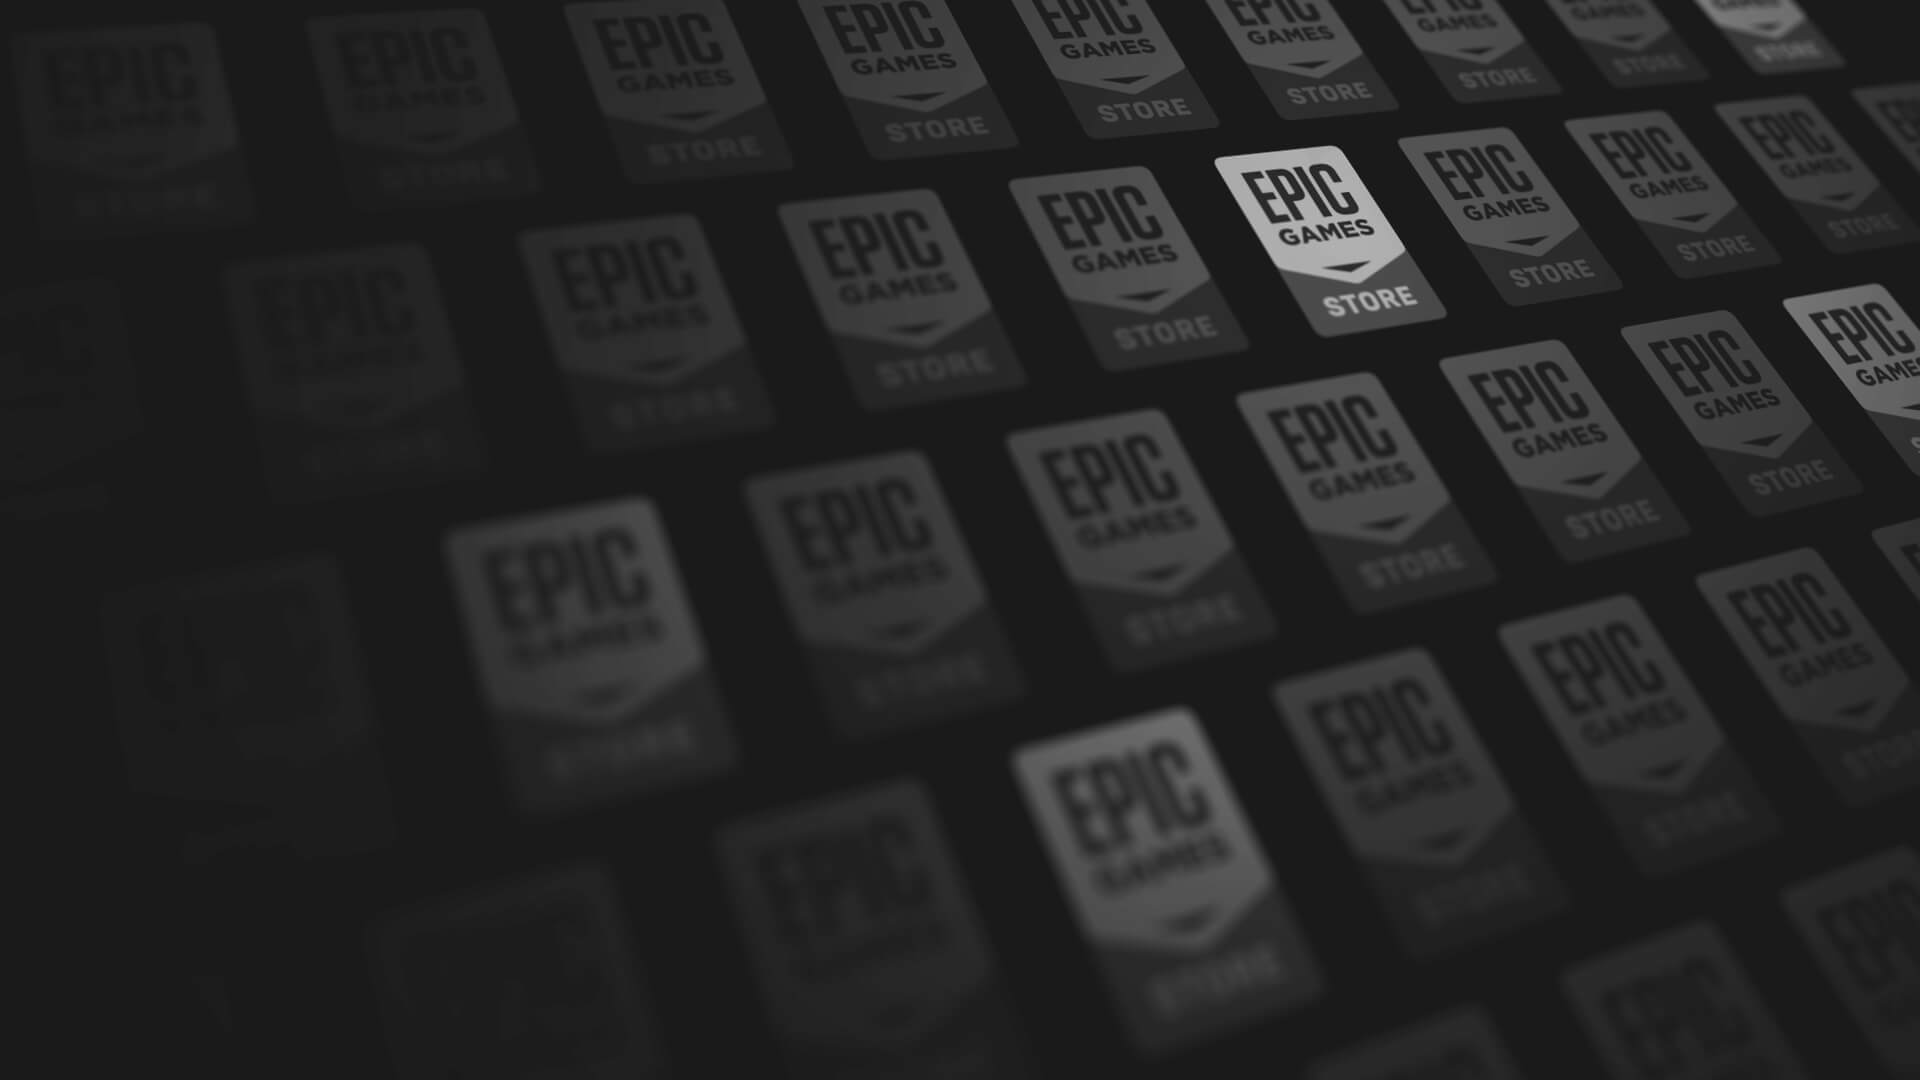 Epic Games Launcher will receive a fix for high CPU usage bug 